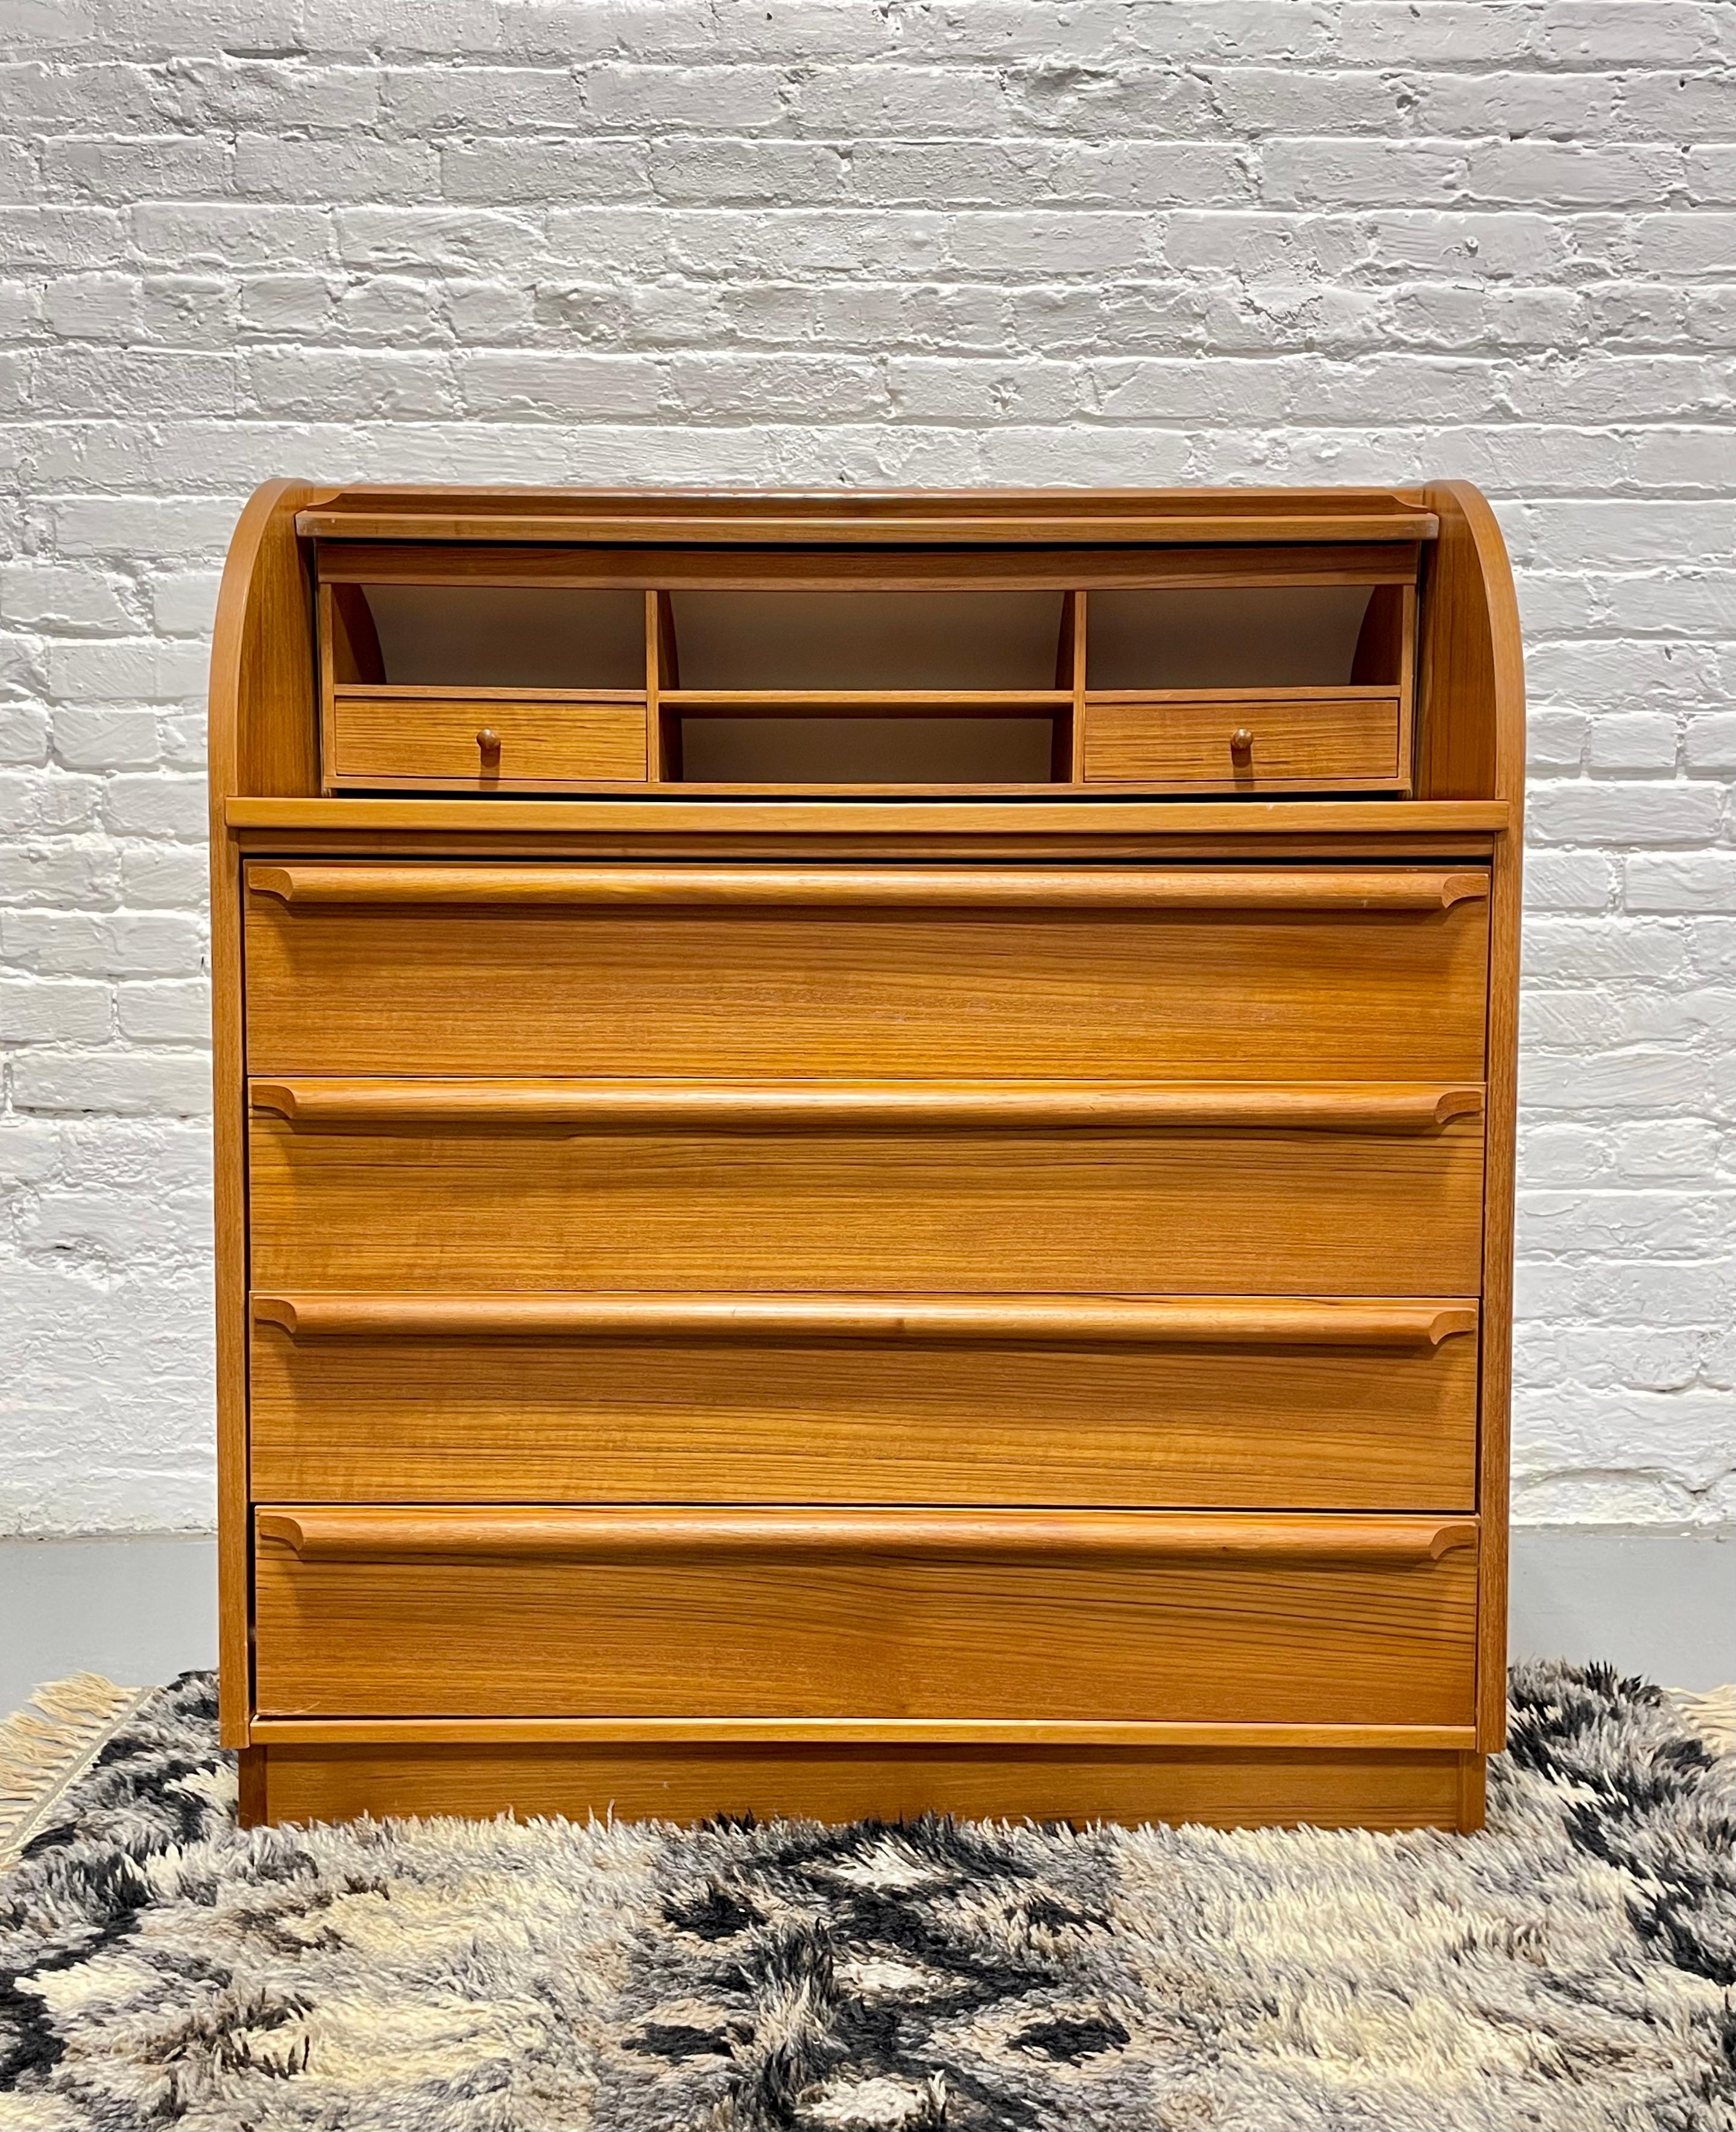 Vintage Mid century Modern Teak Secretary desk, Made in Denmark. This piece boasts tons of storage space in the four deep and spacious drawers and above there is a hidden pull out desk plus additional storage cubbies for all your supplies. Pull up a